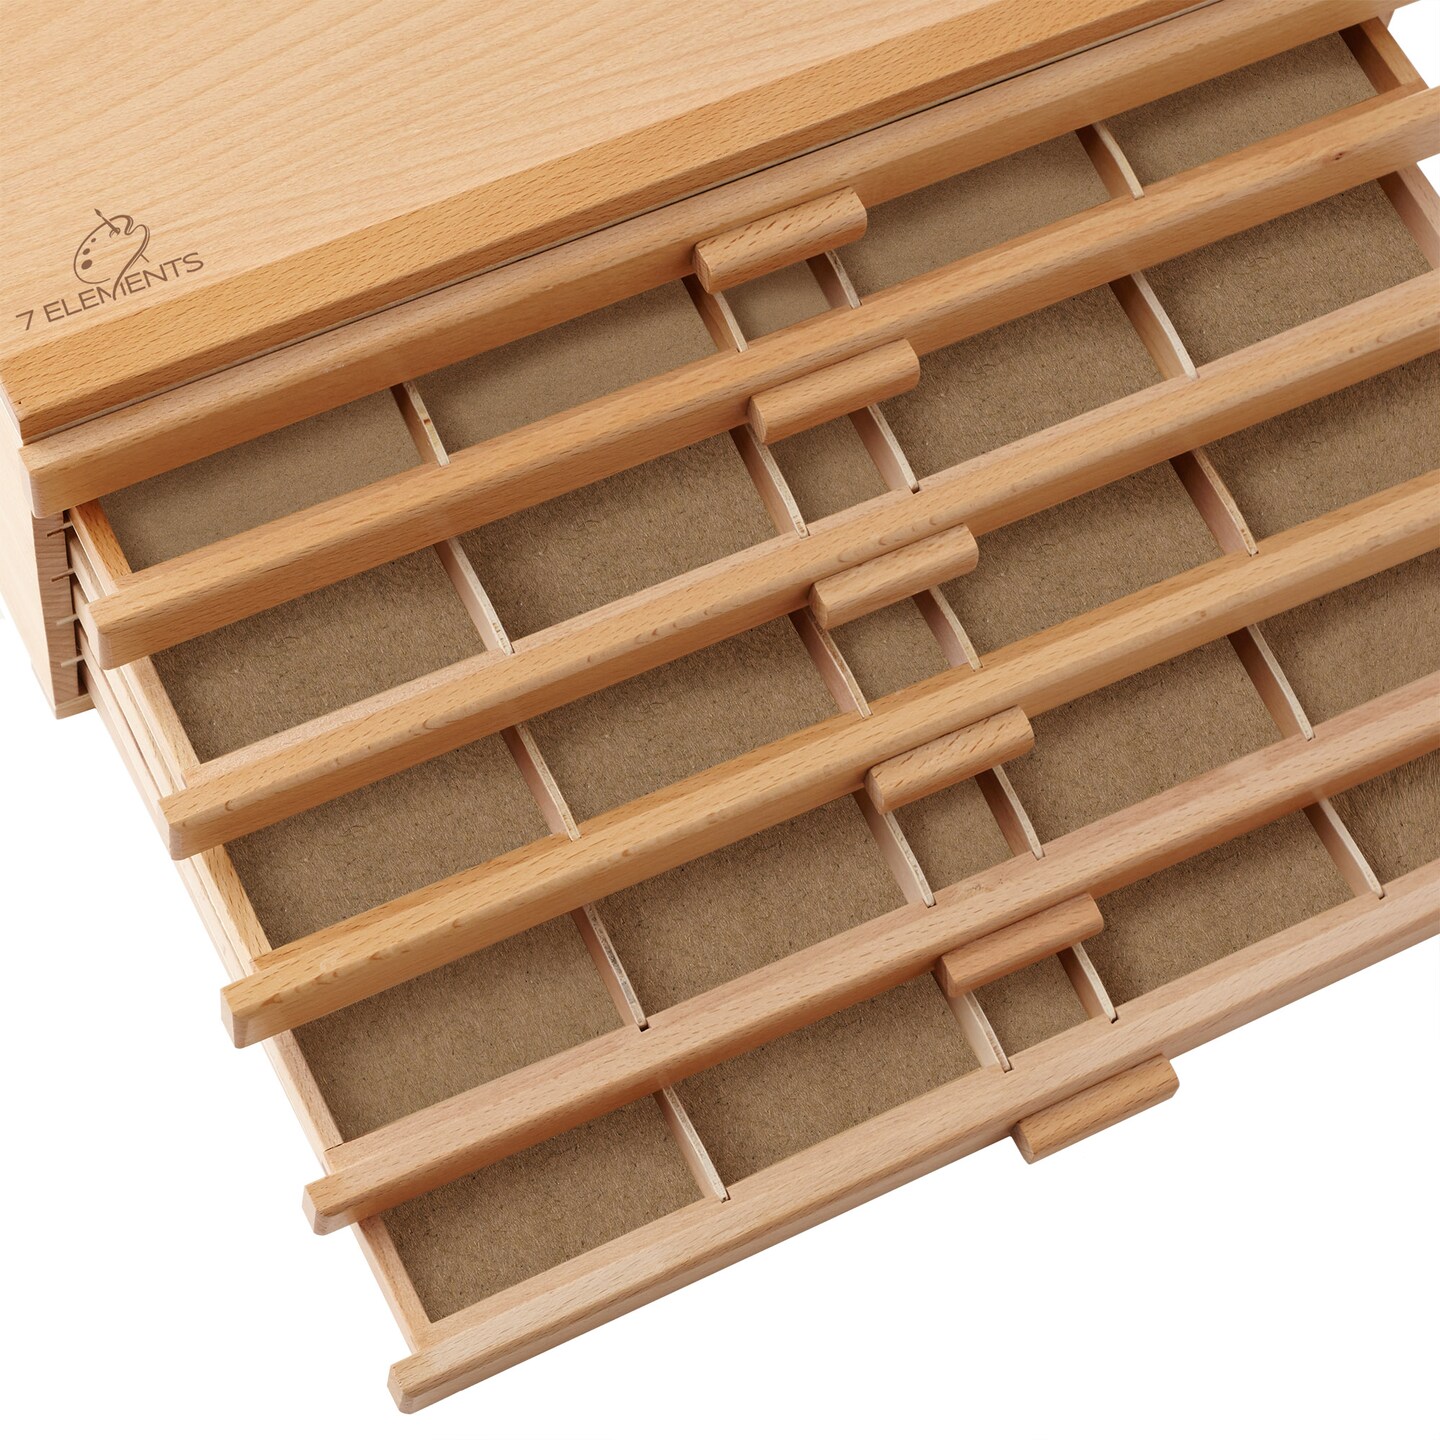 7 Elements Wooden Artist Storage Supply Box for Pastels, Pencils, Pens, Markers, Brushes and Tools